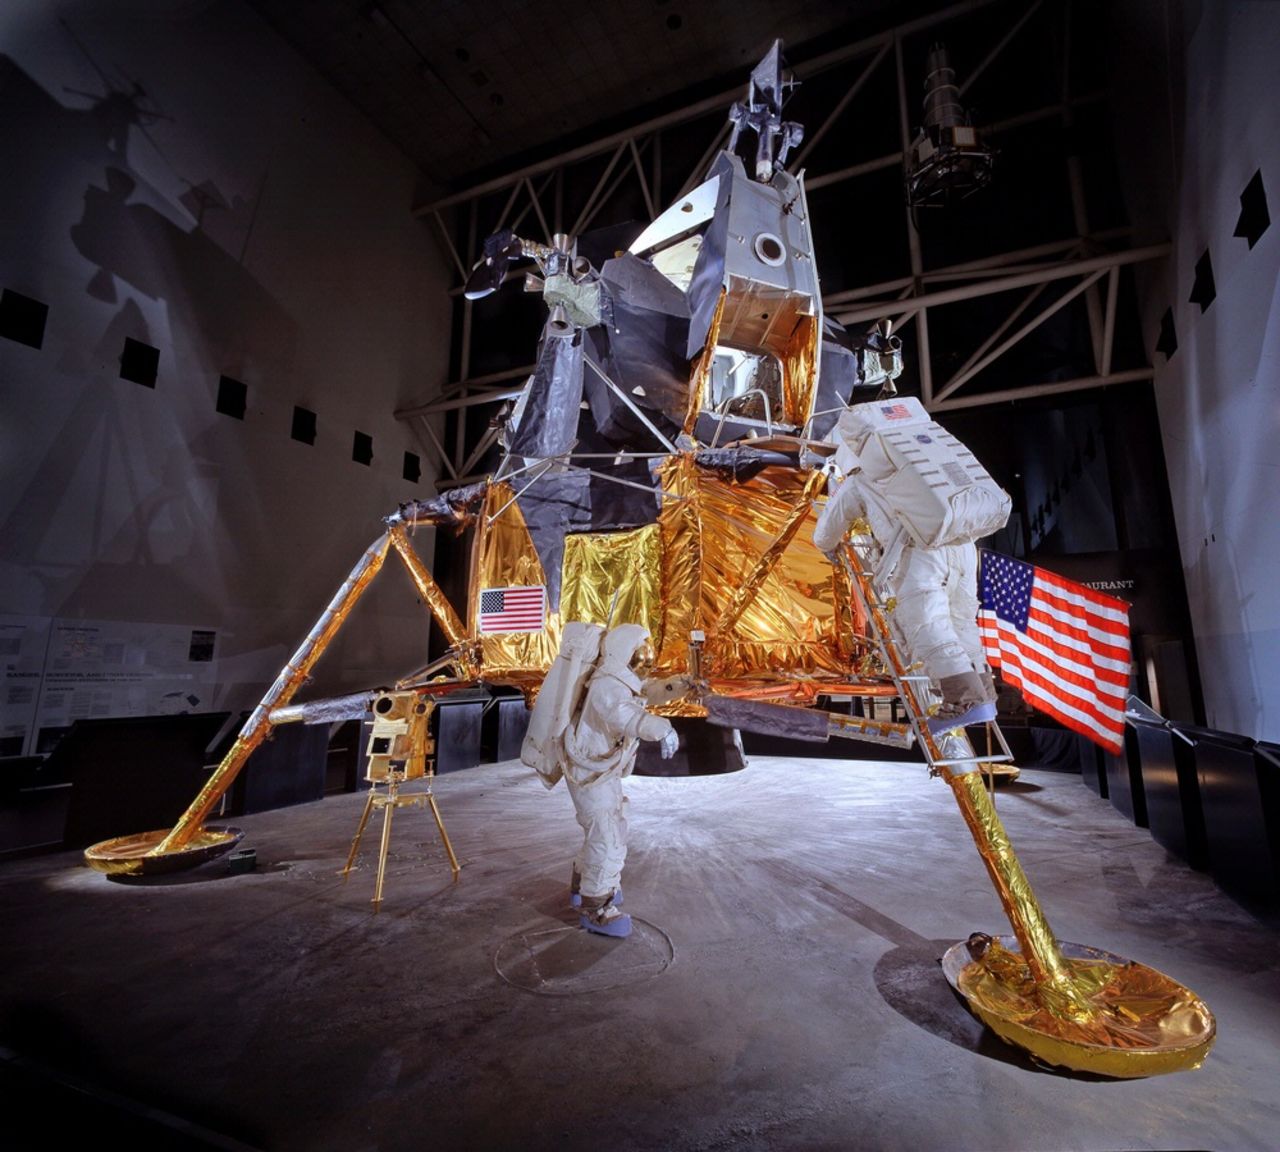 The Apollo lunar module No. 2 is on display.